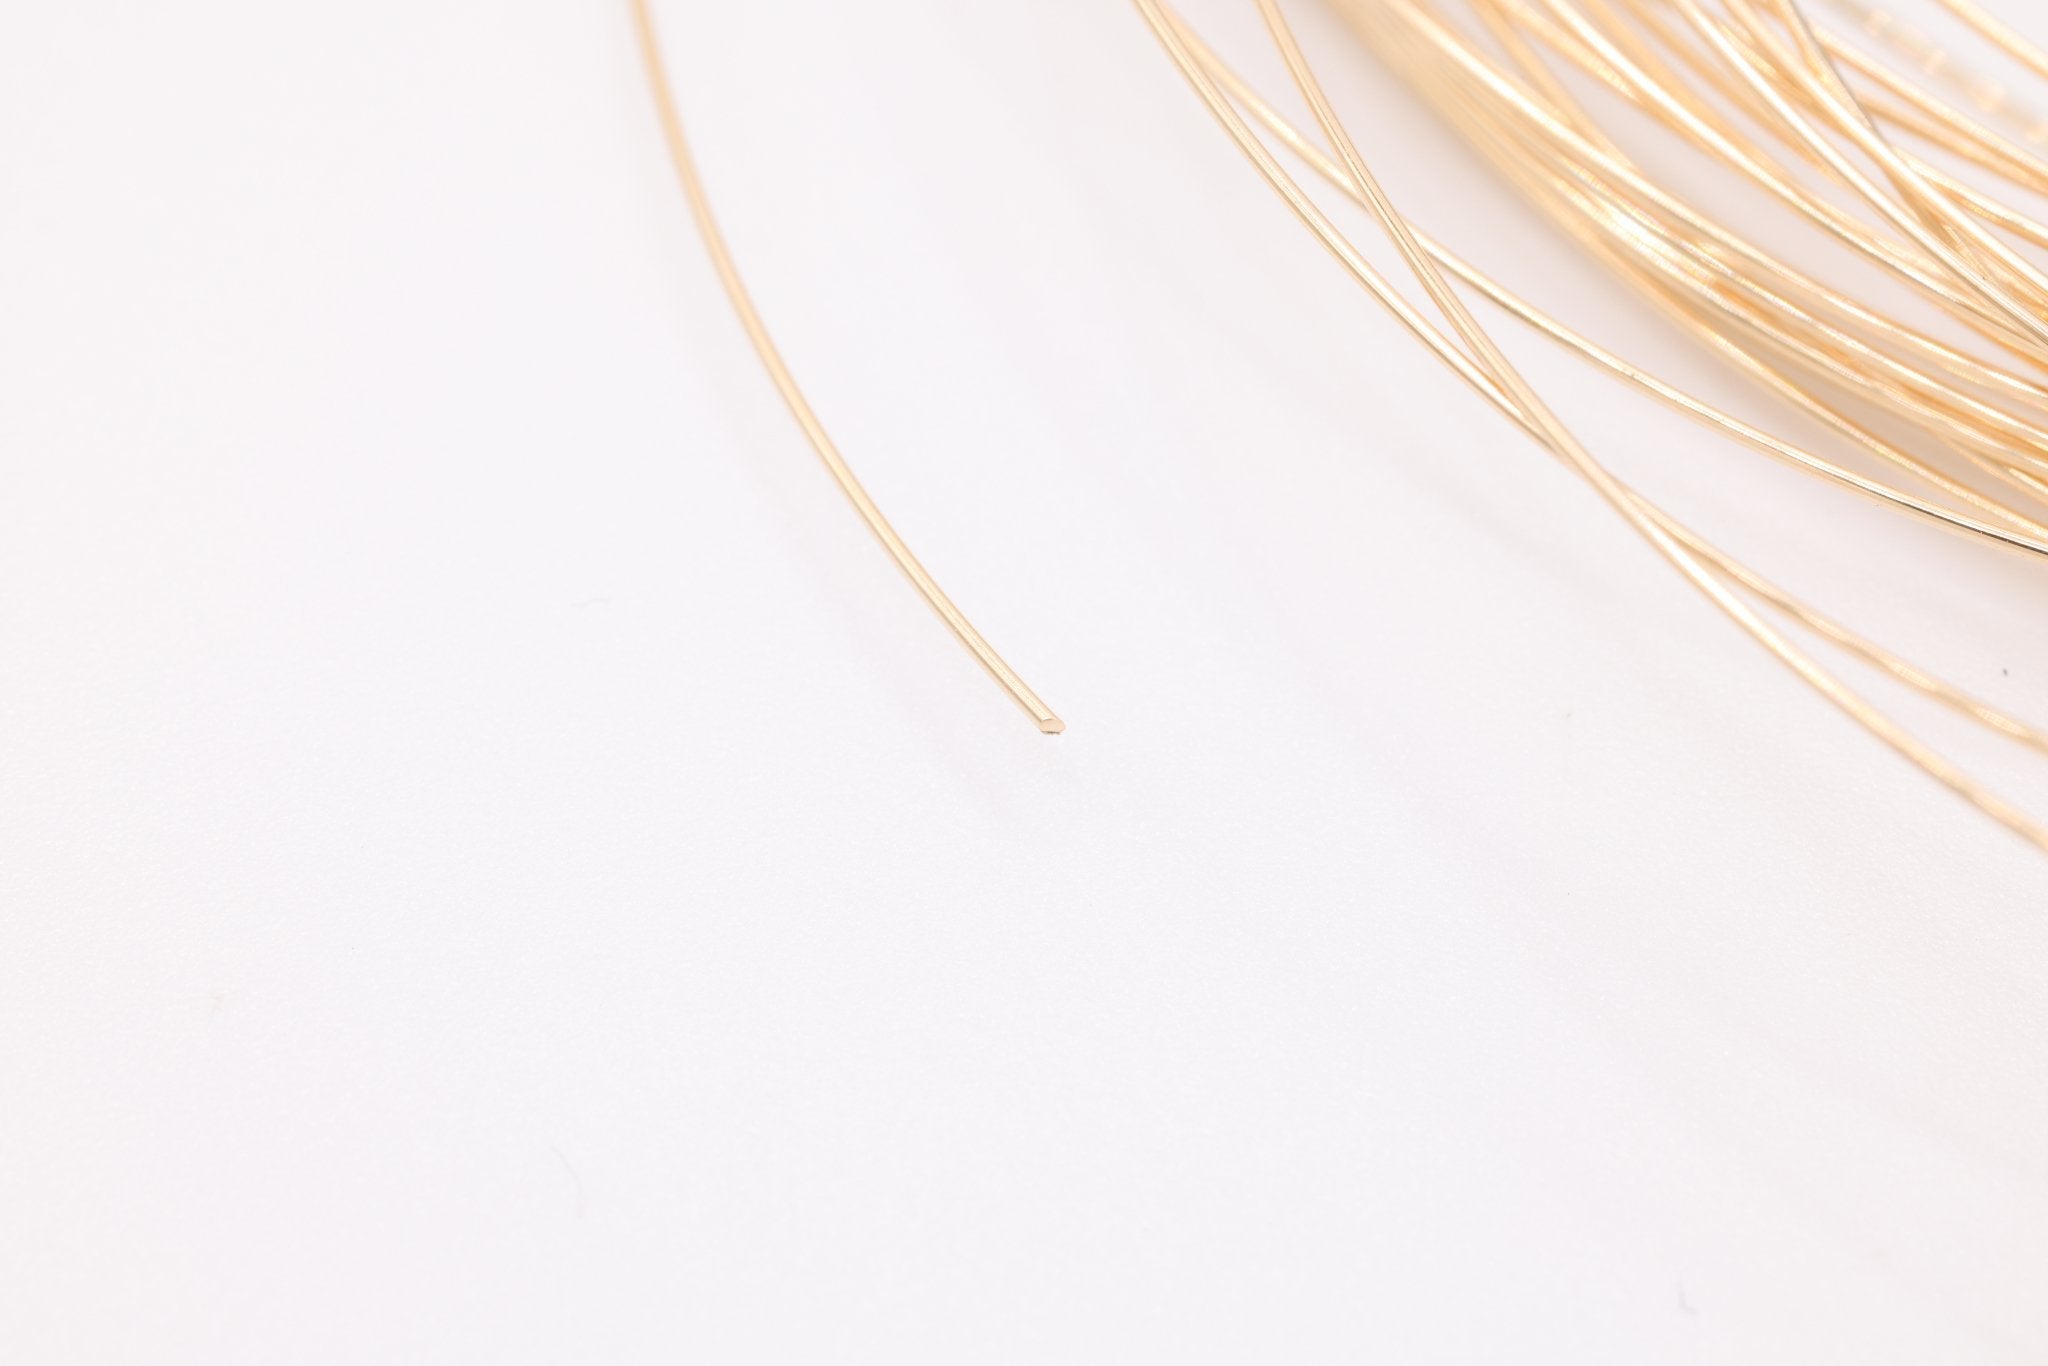 14k Gold Filled Wire, 22 Gauge 0.63mm, Gold Wire, Half Hard Jewelry Wire - HarperCrown